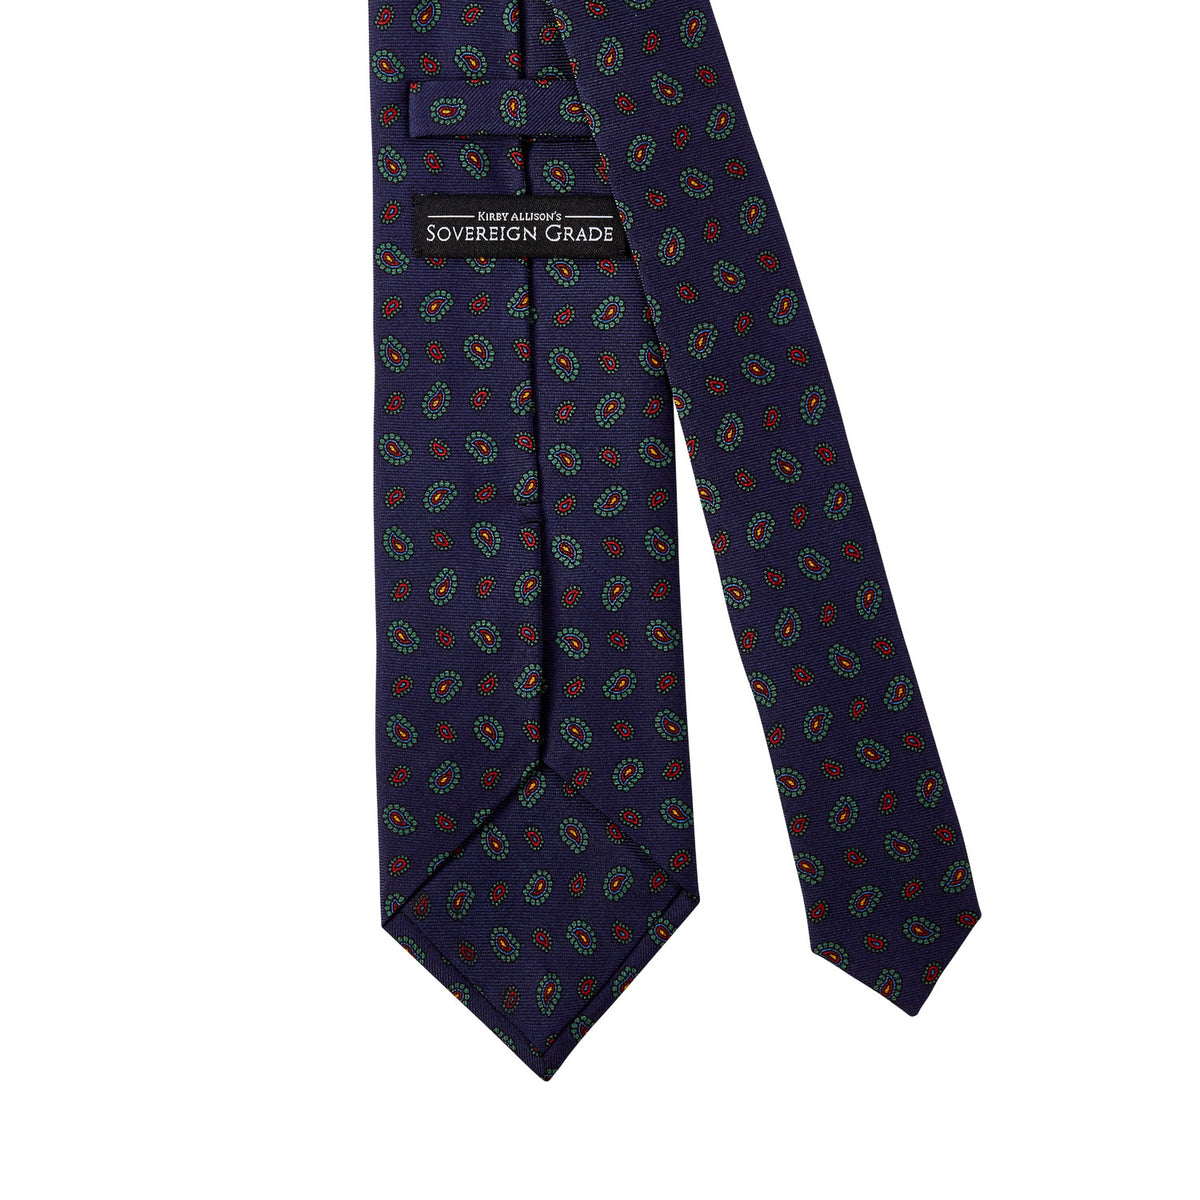 A KirbyAllison.com Sovereign Grade Navy 36oz Printed Silk Paisley Tie, showcasing exquisite craftsmanship from the United Kingdom.